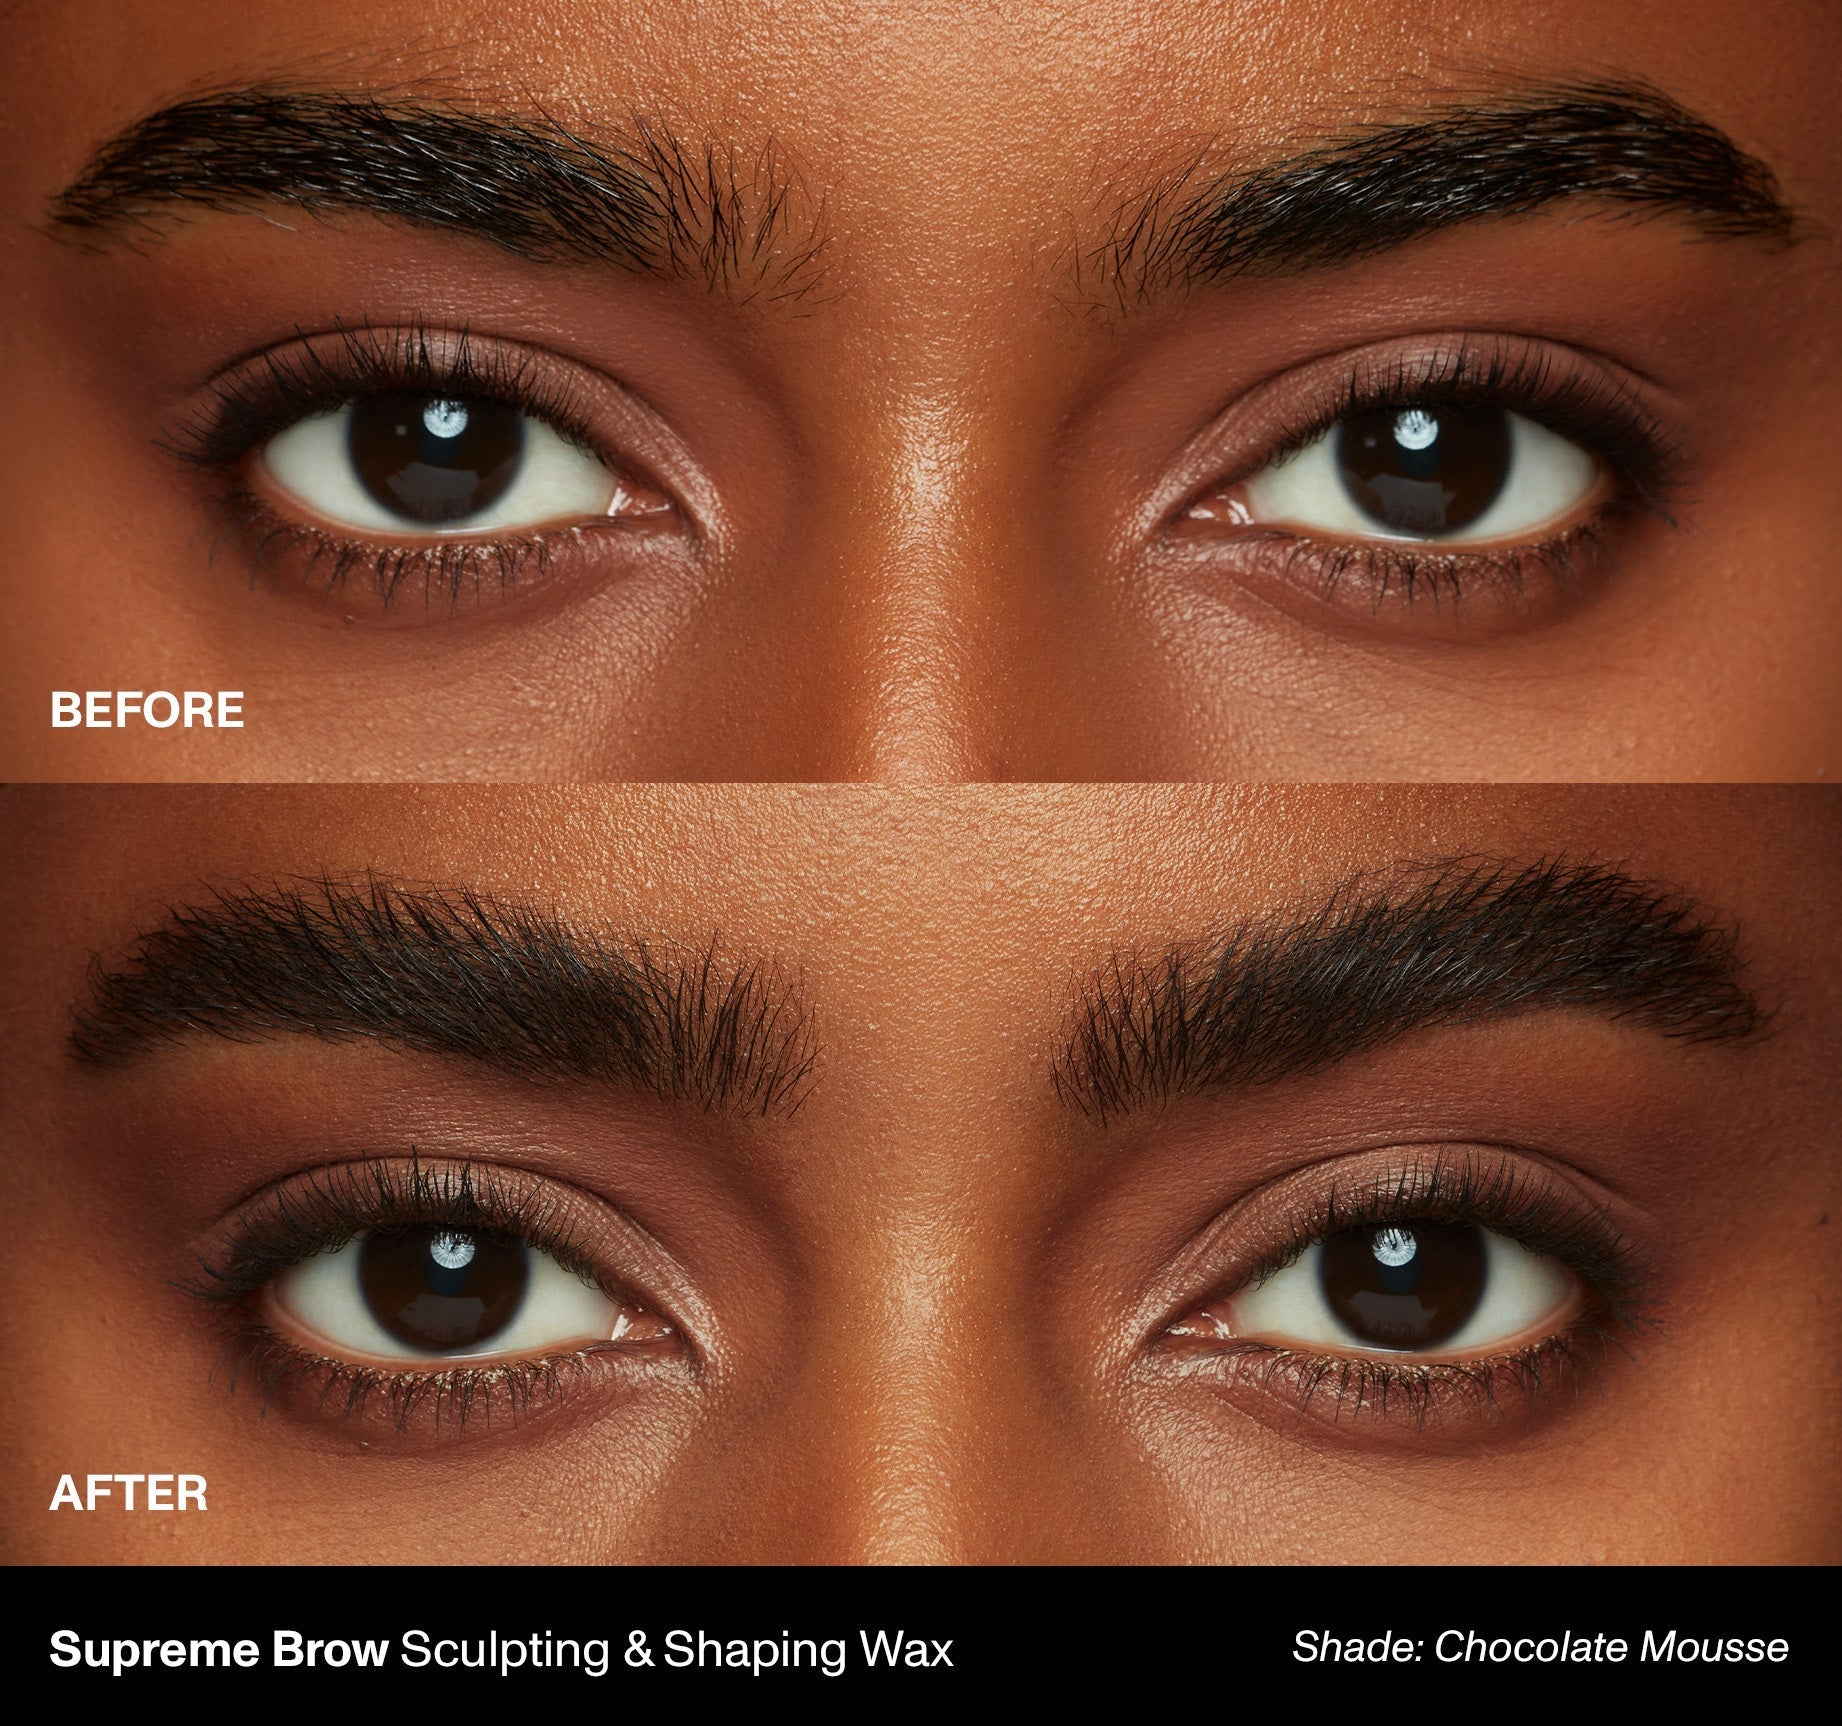 Supreme Brow Sculpting And Shaping Wax - Chocolate Mousse - Image 6